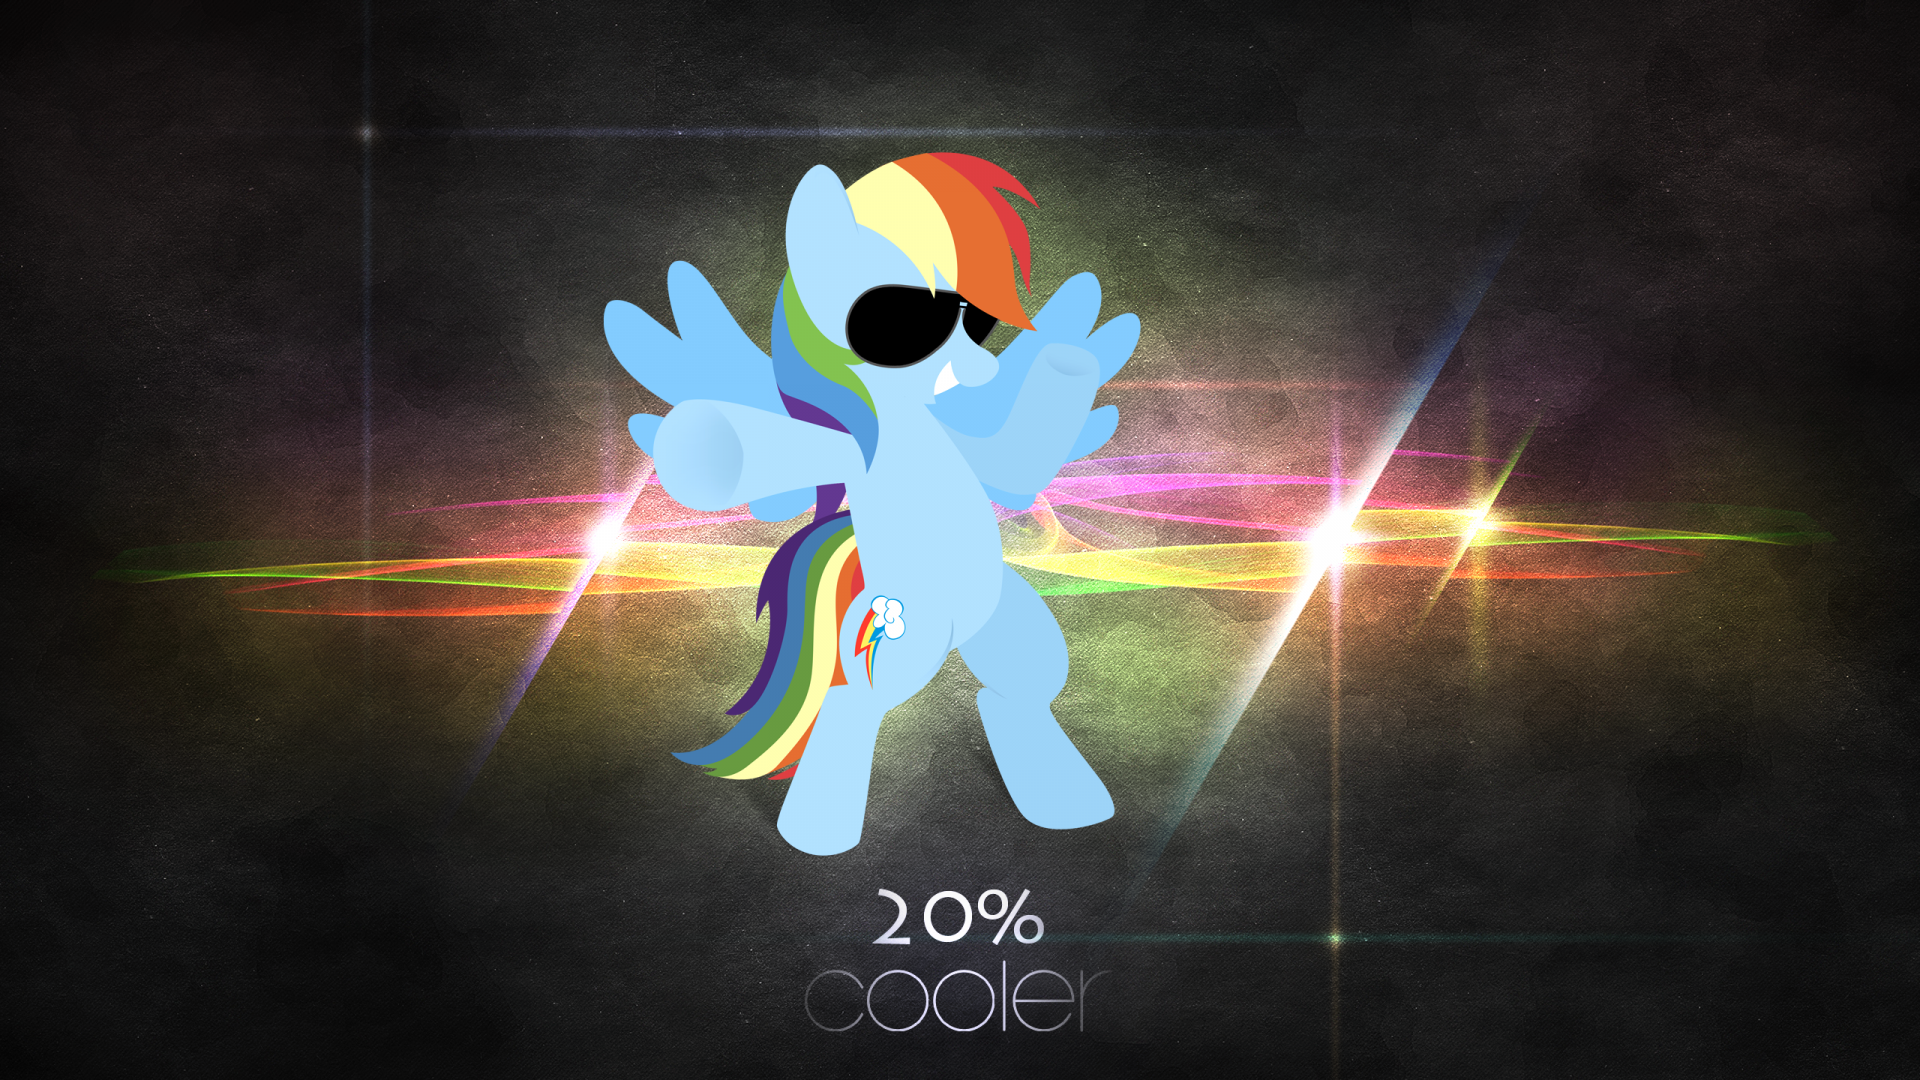 129 Rainbow Dash Hd Wallpapers Background Images Wallpaper Images, Photos, Reviews